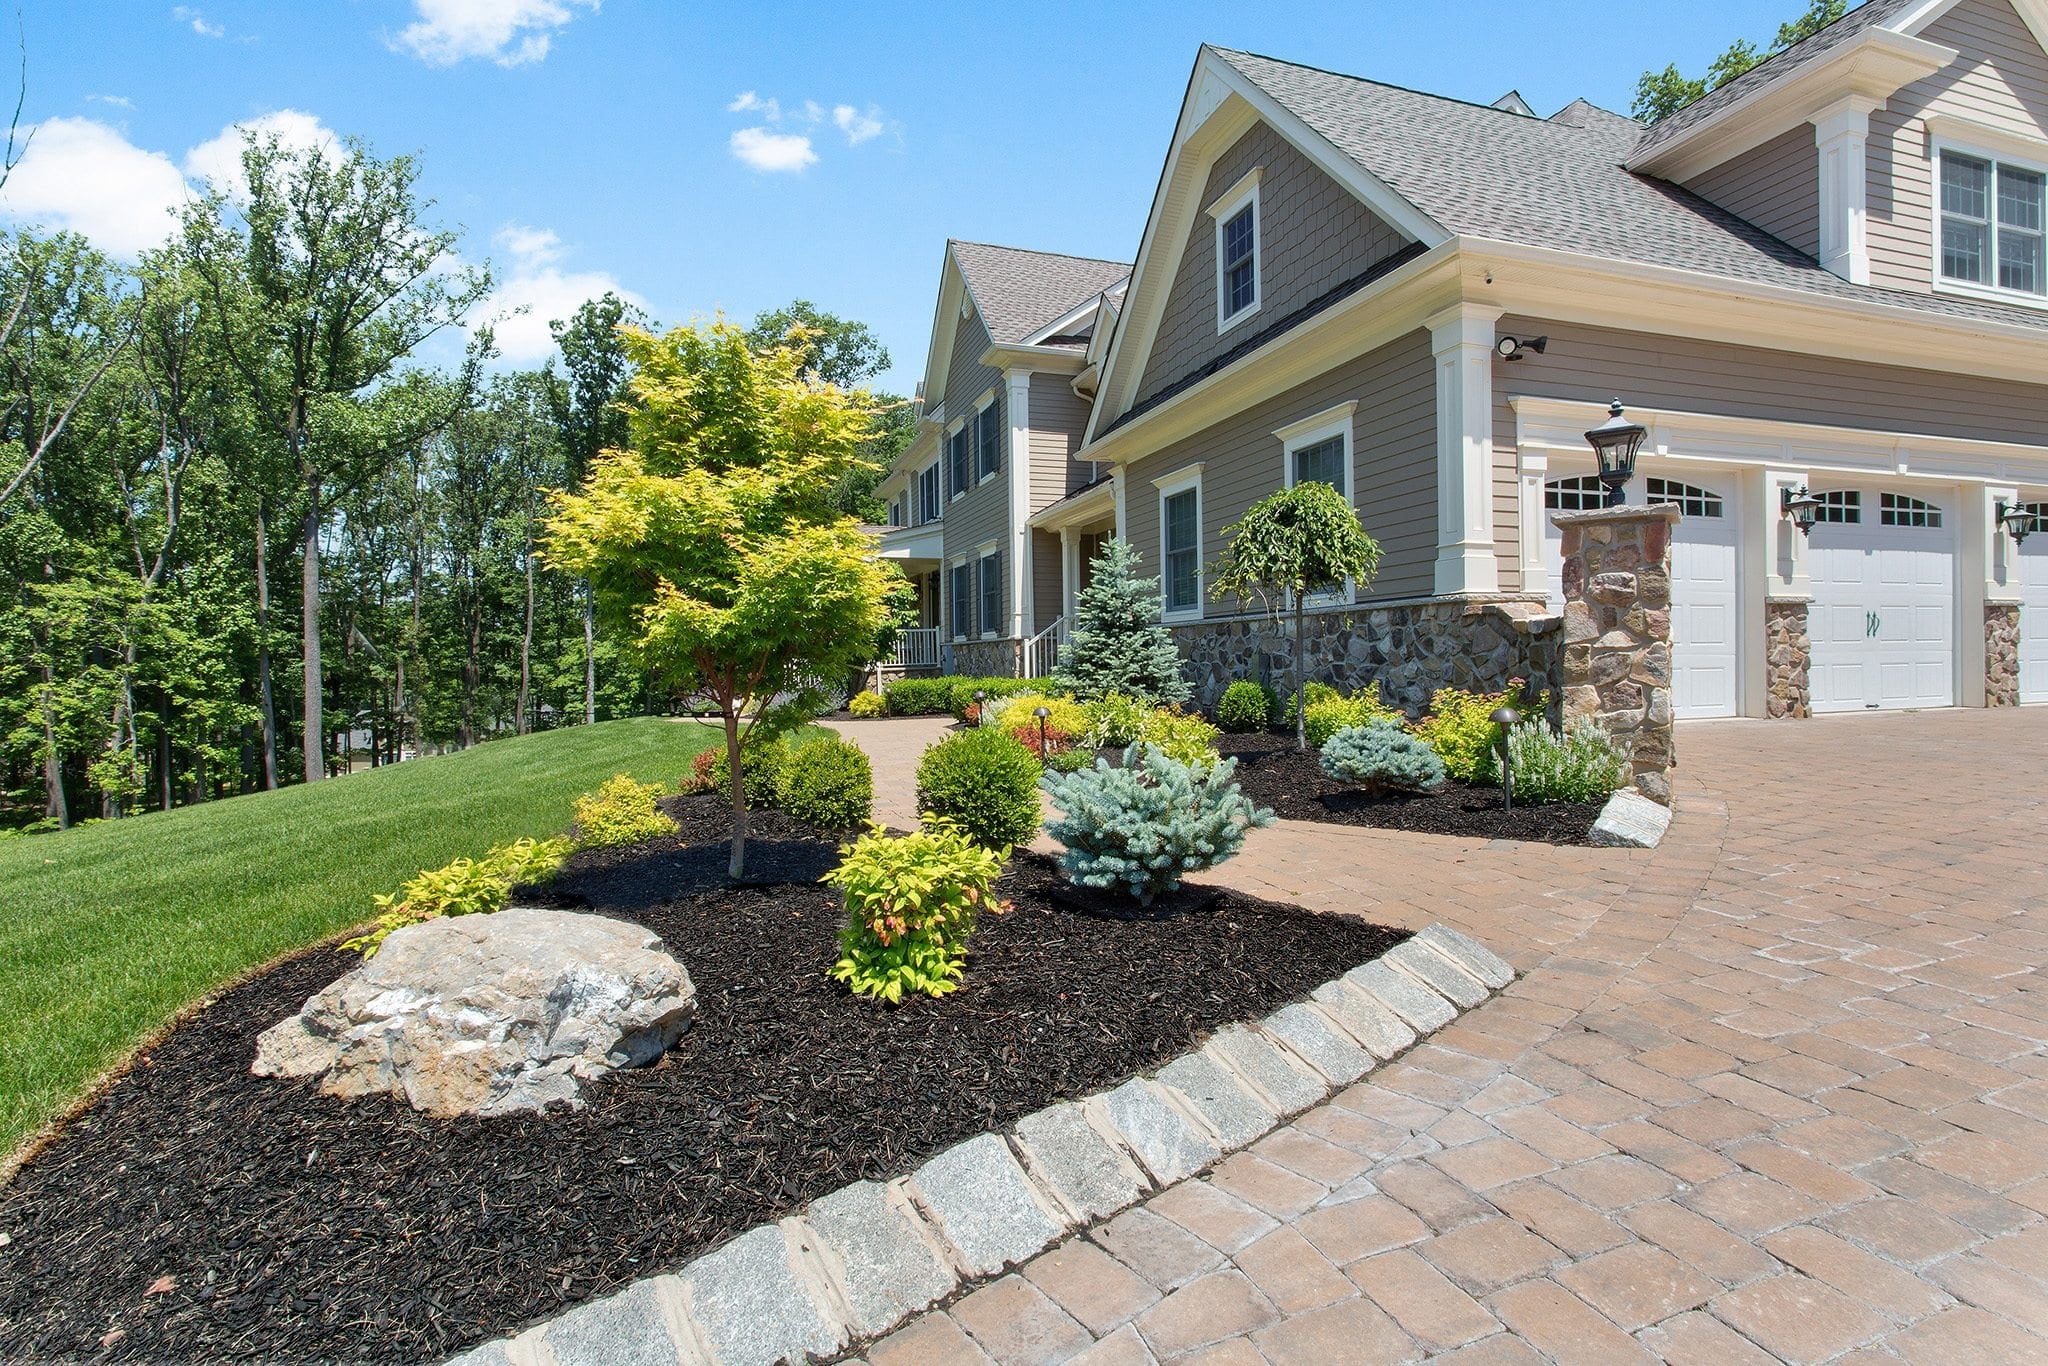 5 Unique Front Yard Landscape Ideas For Your Somerset County Home